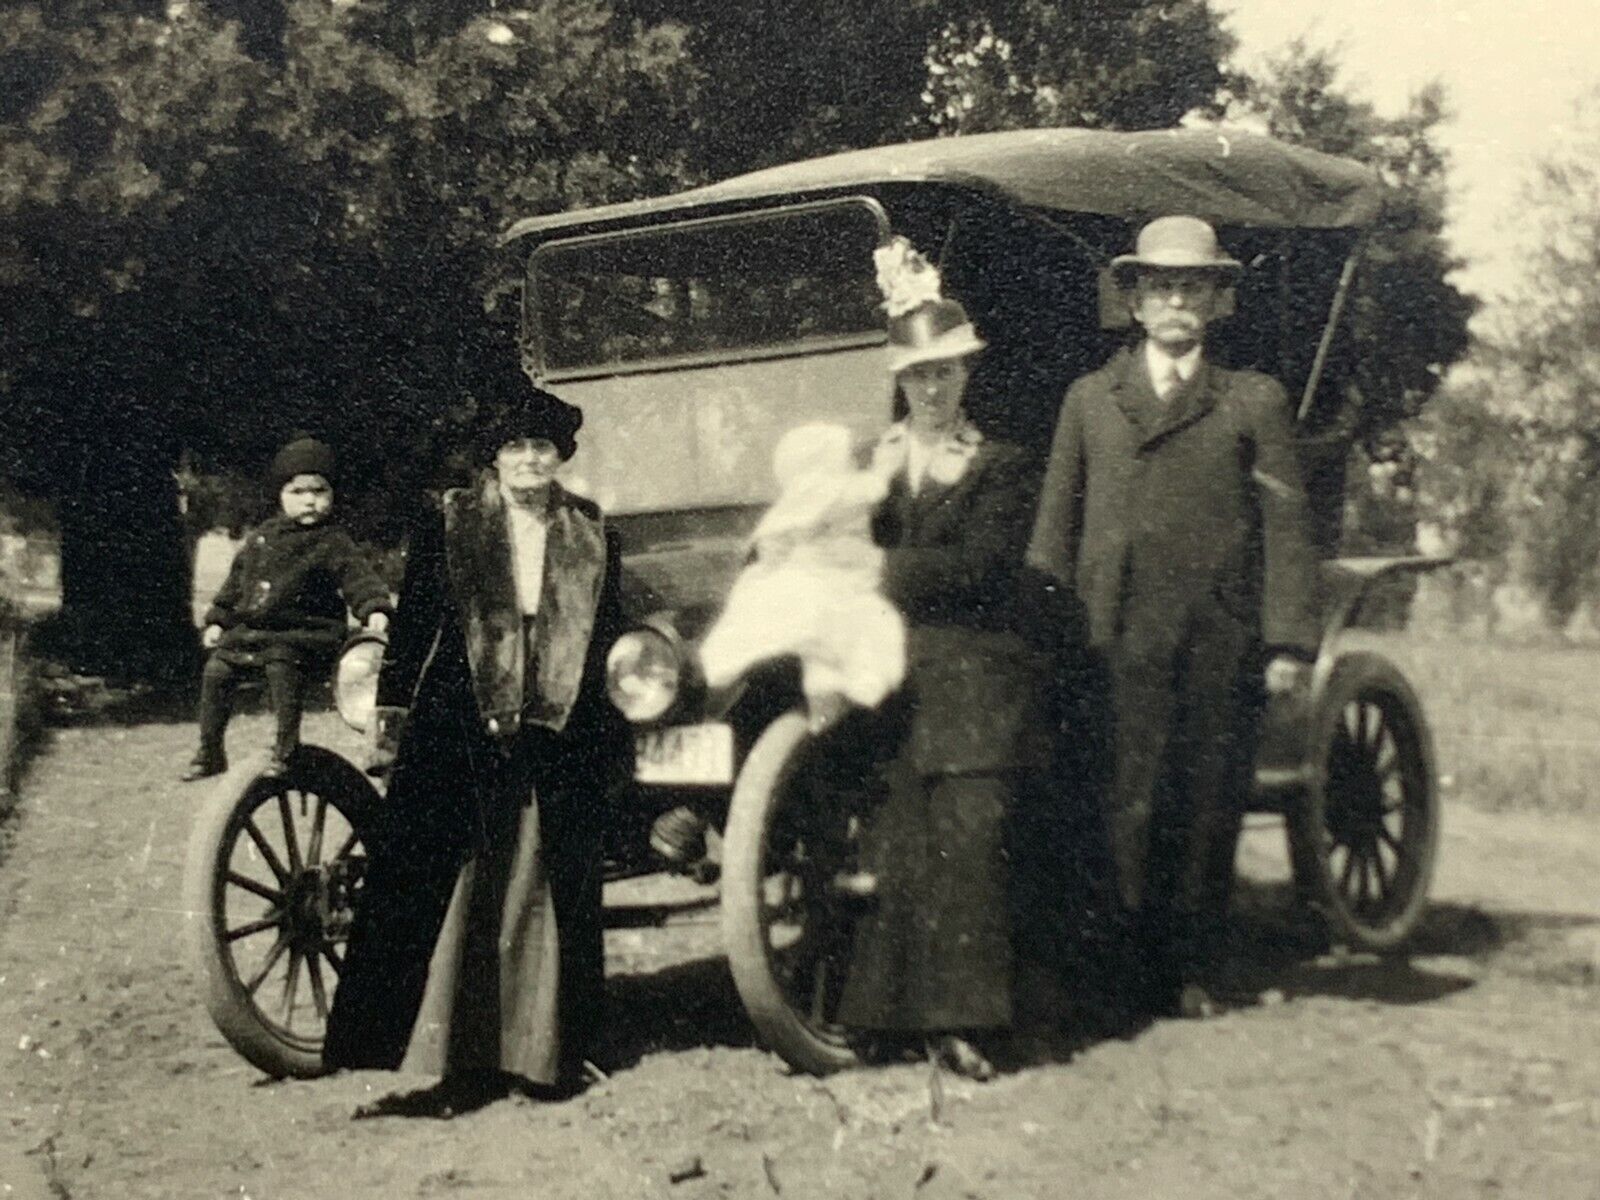 AxG) Found Photograph 1916 Family Roadside With Old Car Blurry Baby